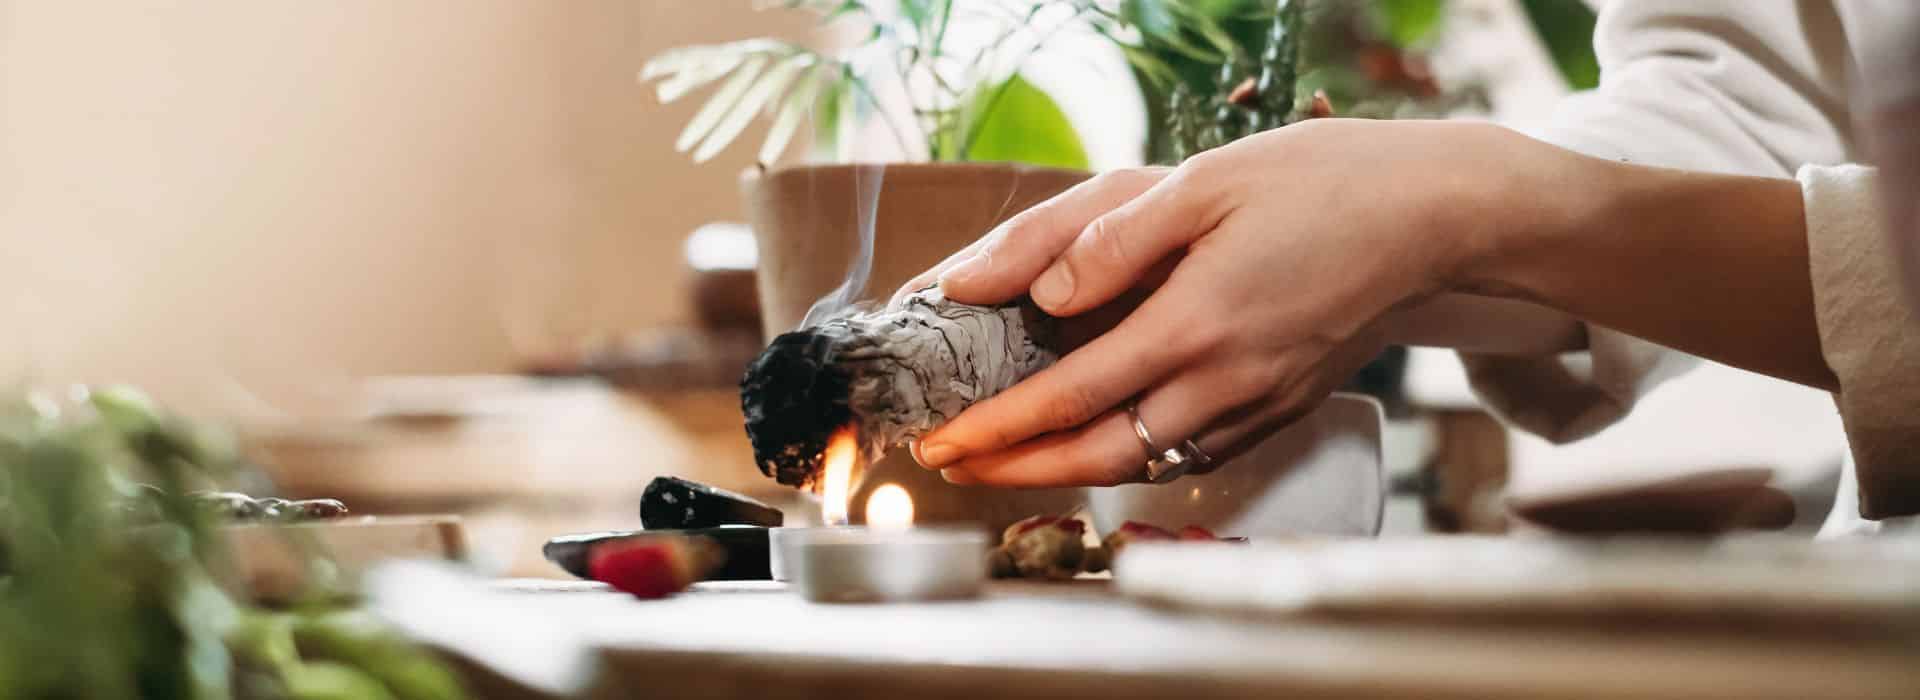 Woman lighting white sage in a cleansing ritual | The Perfect Bath: Create the Ultimate Ritual Bathing Experience | Shine Body & Bath Blog